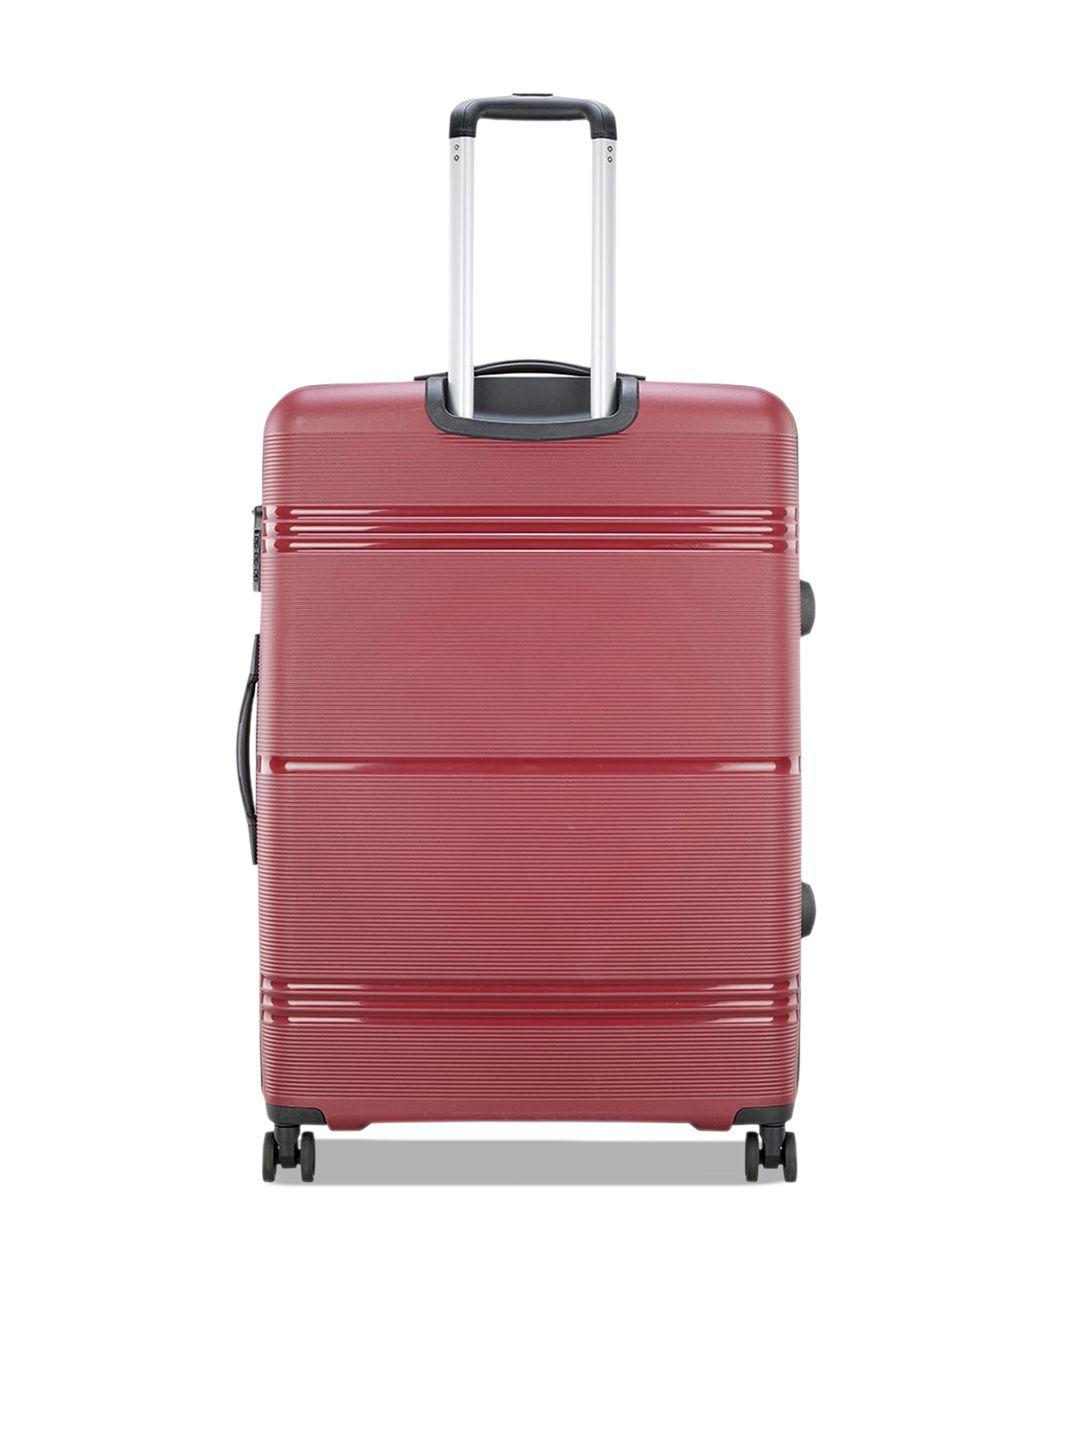 skybags textured hard-sided large trolley suitcase